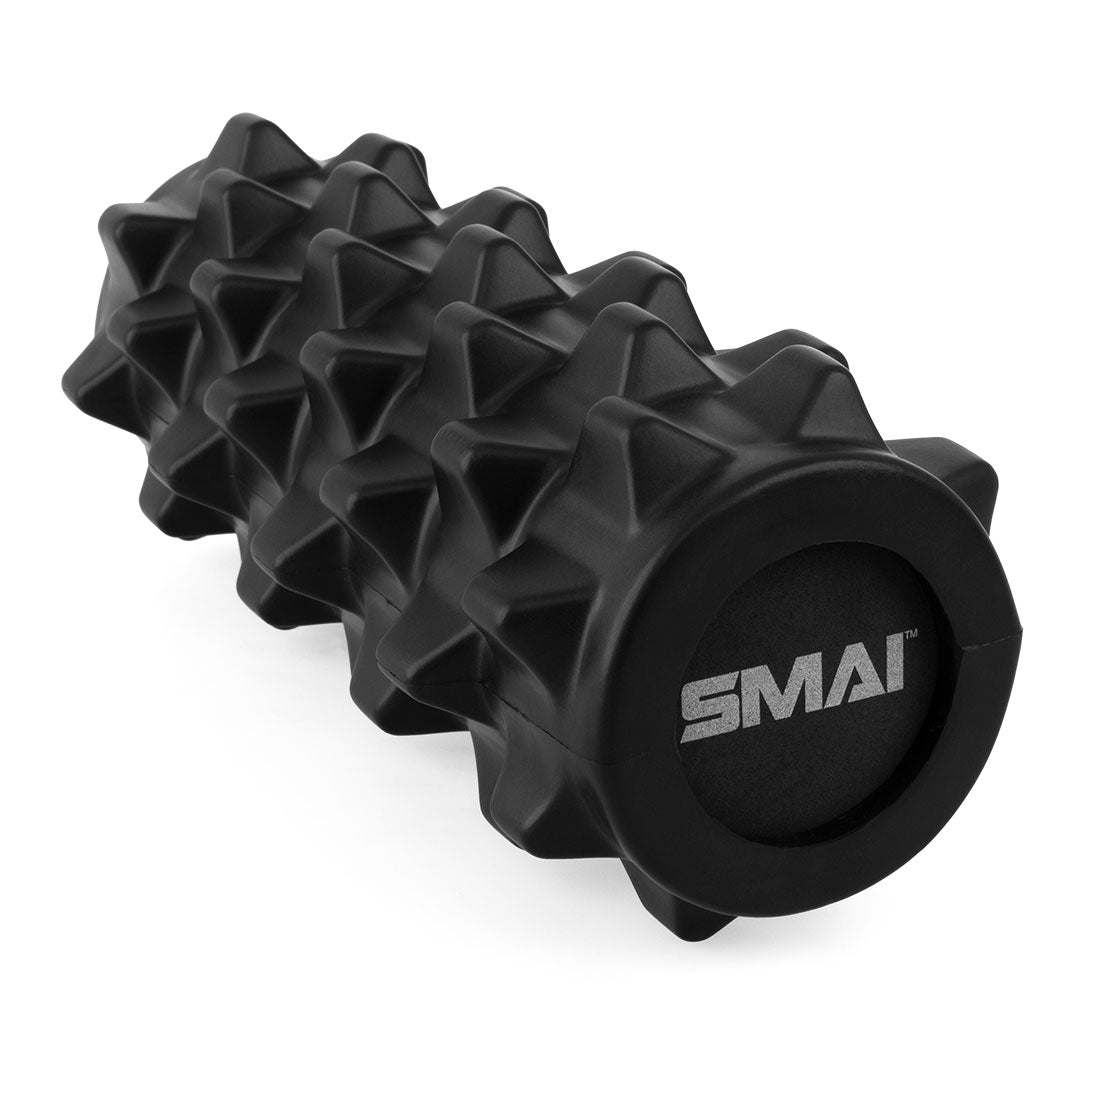 SMAI Grid Roller, Weights & Fitness